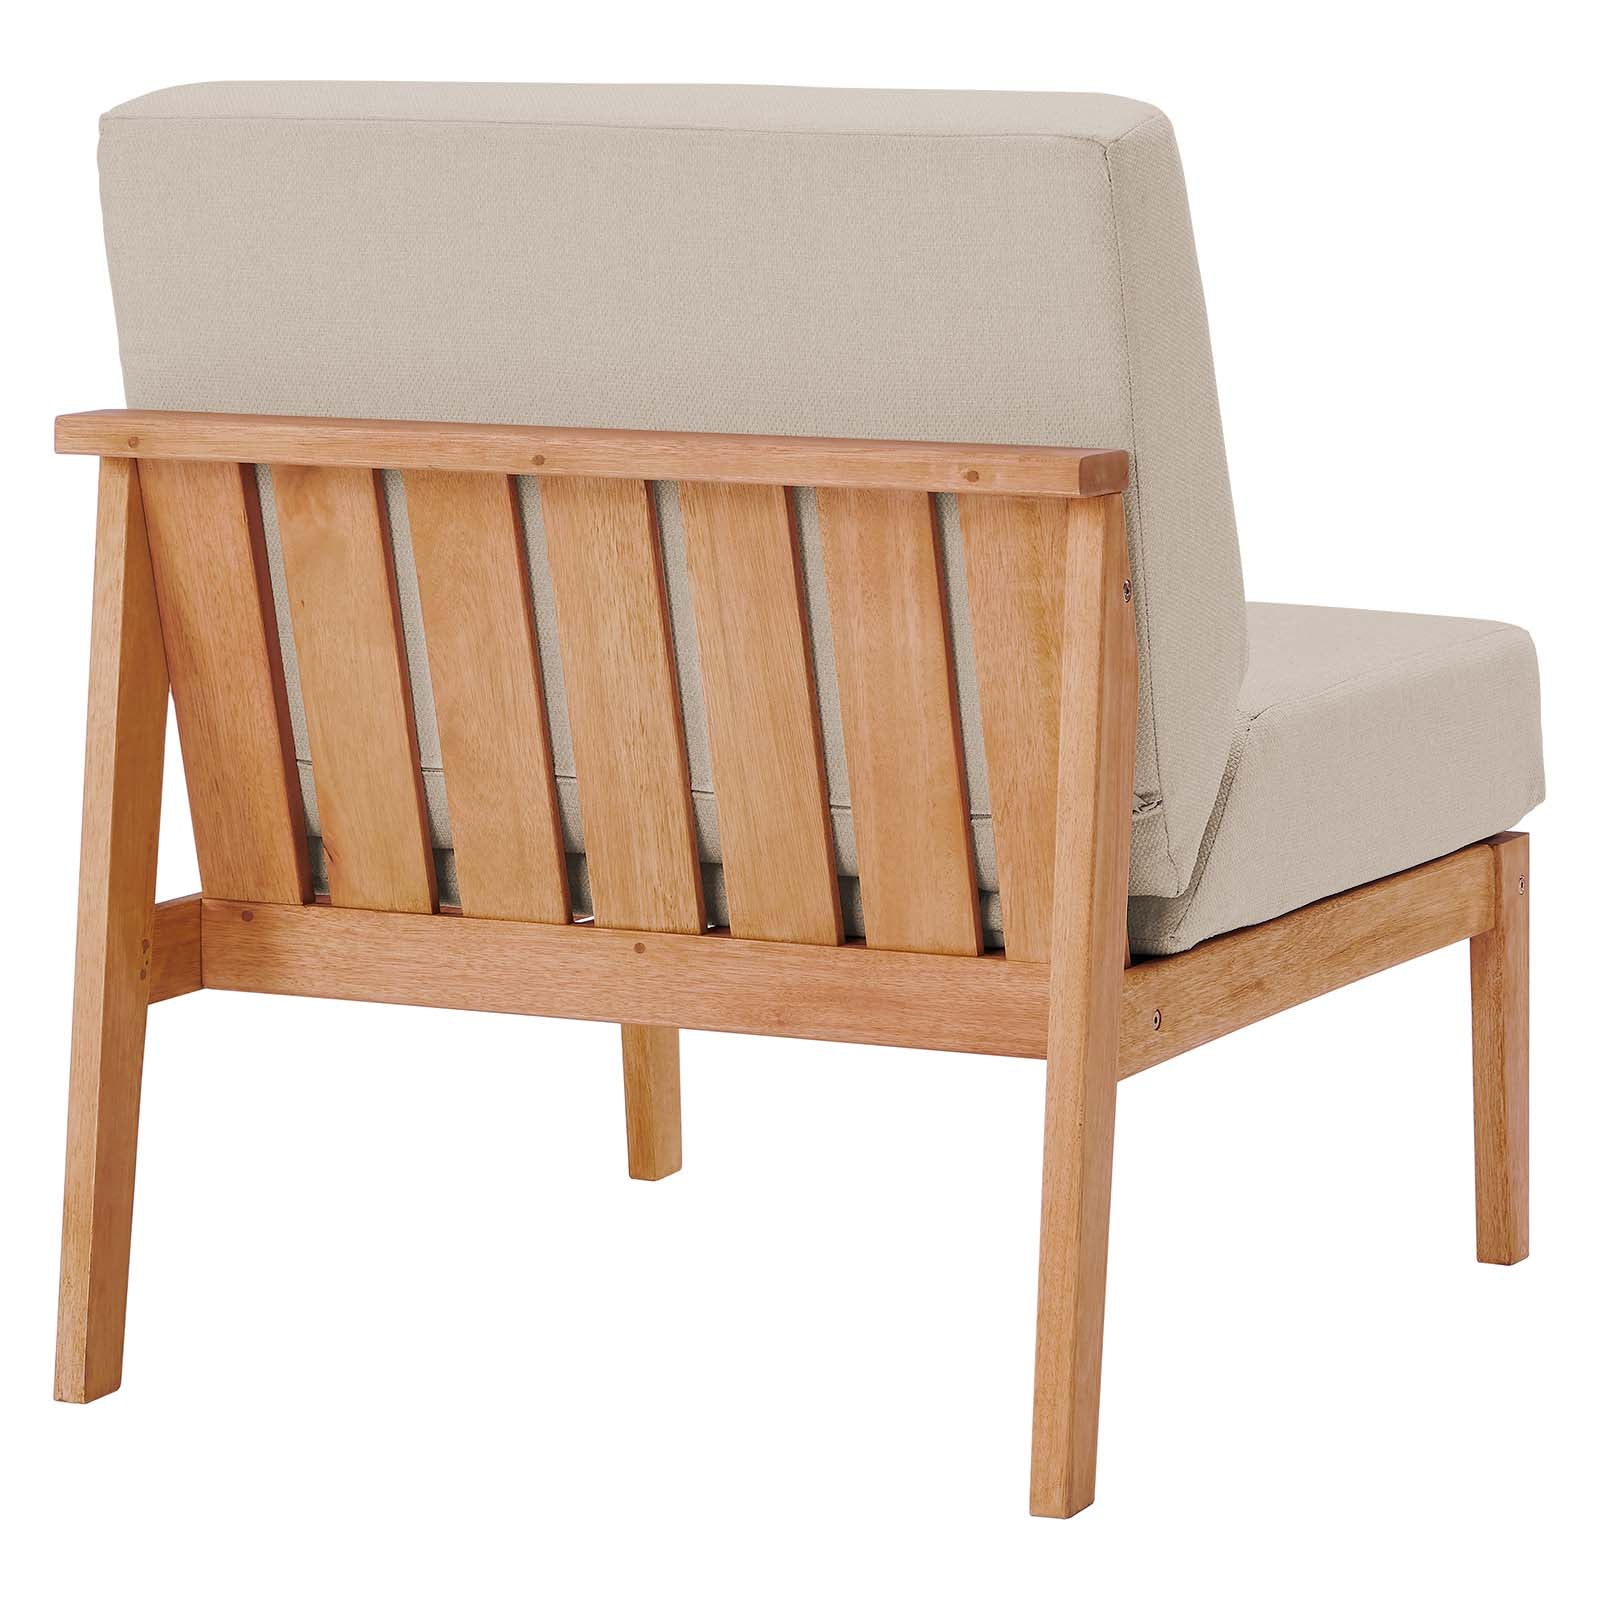 Modway Outdoor Chairs - Sedona Outdoor Patio Eucalyptus Wood Sectional Sofa Armless Chair Natural Taupe